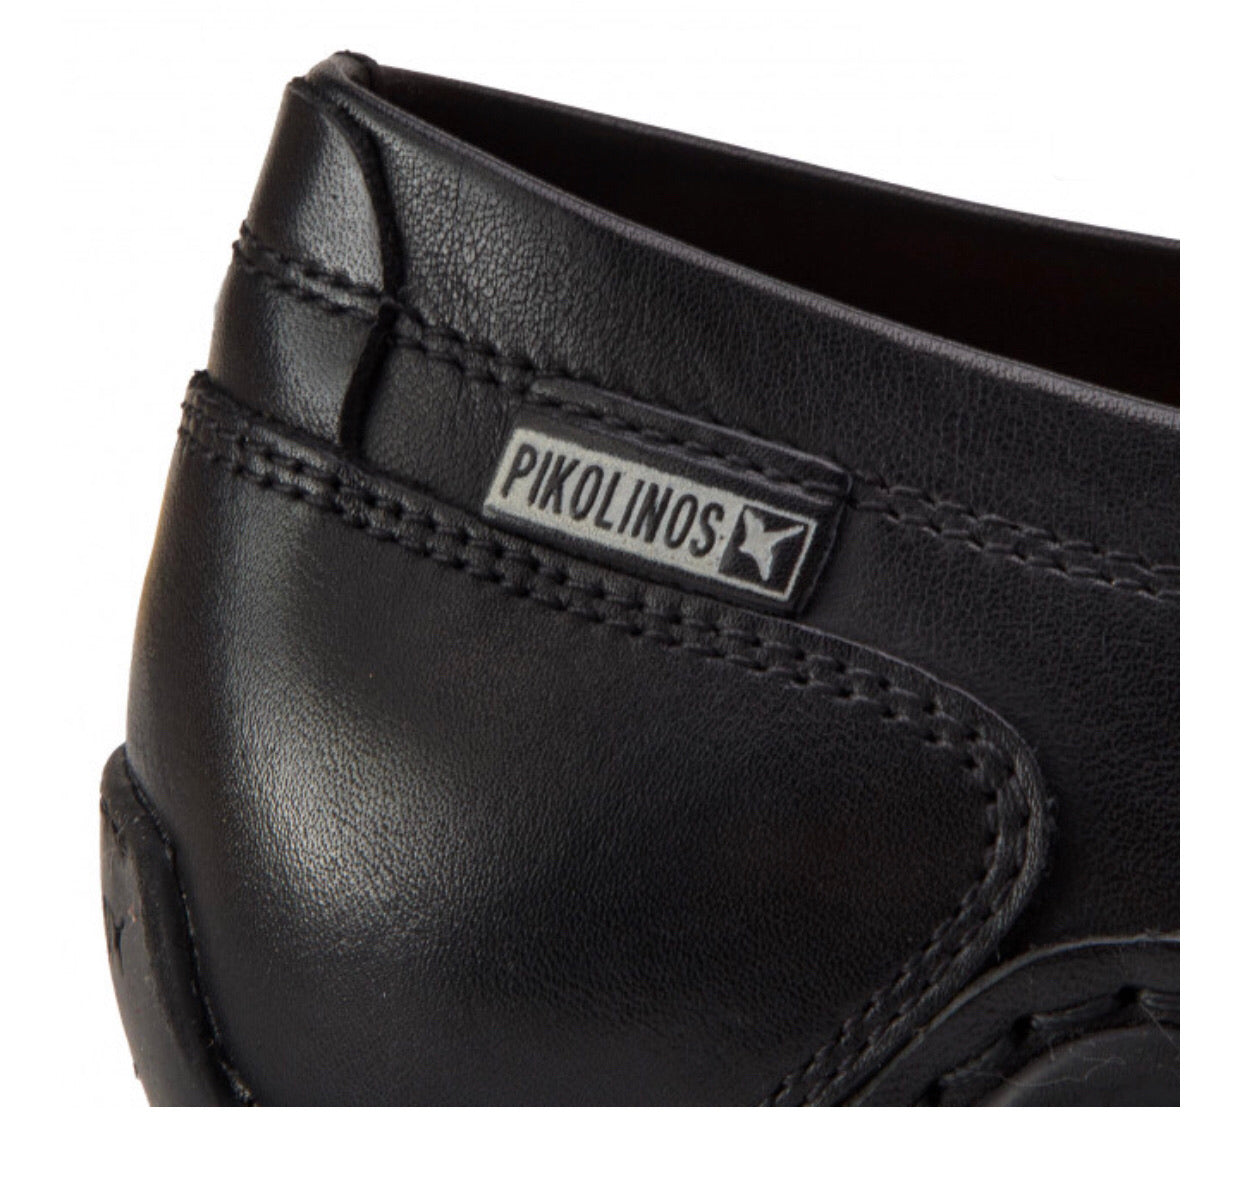 Pikolinos 06H-5303 Black Leather Slip On Shoes Made In Spain